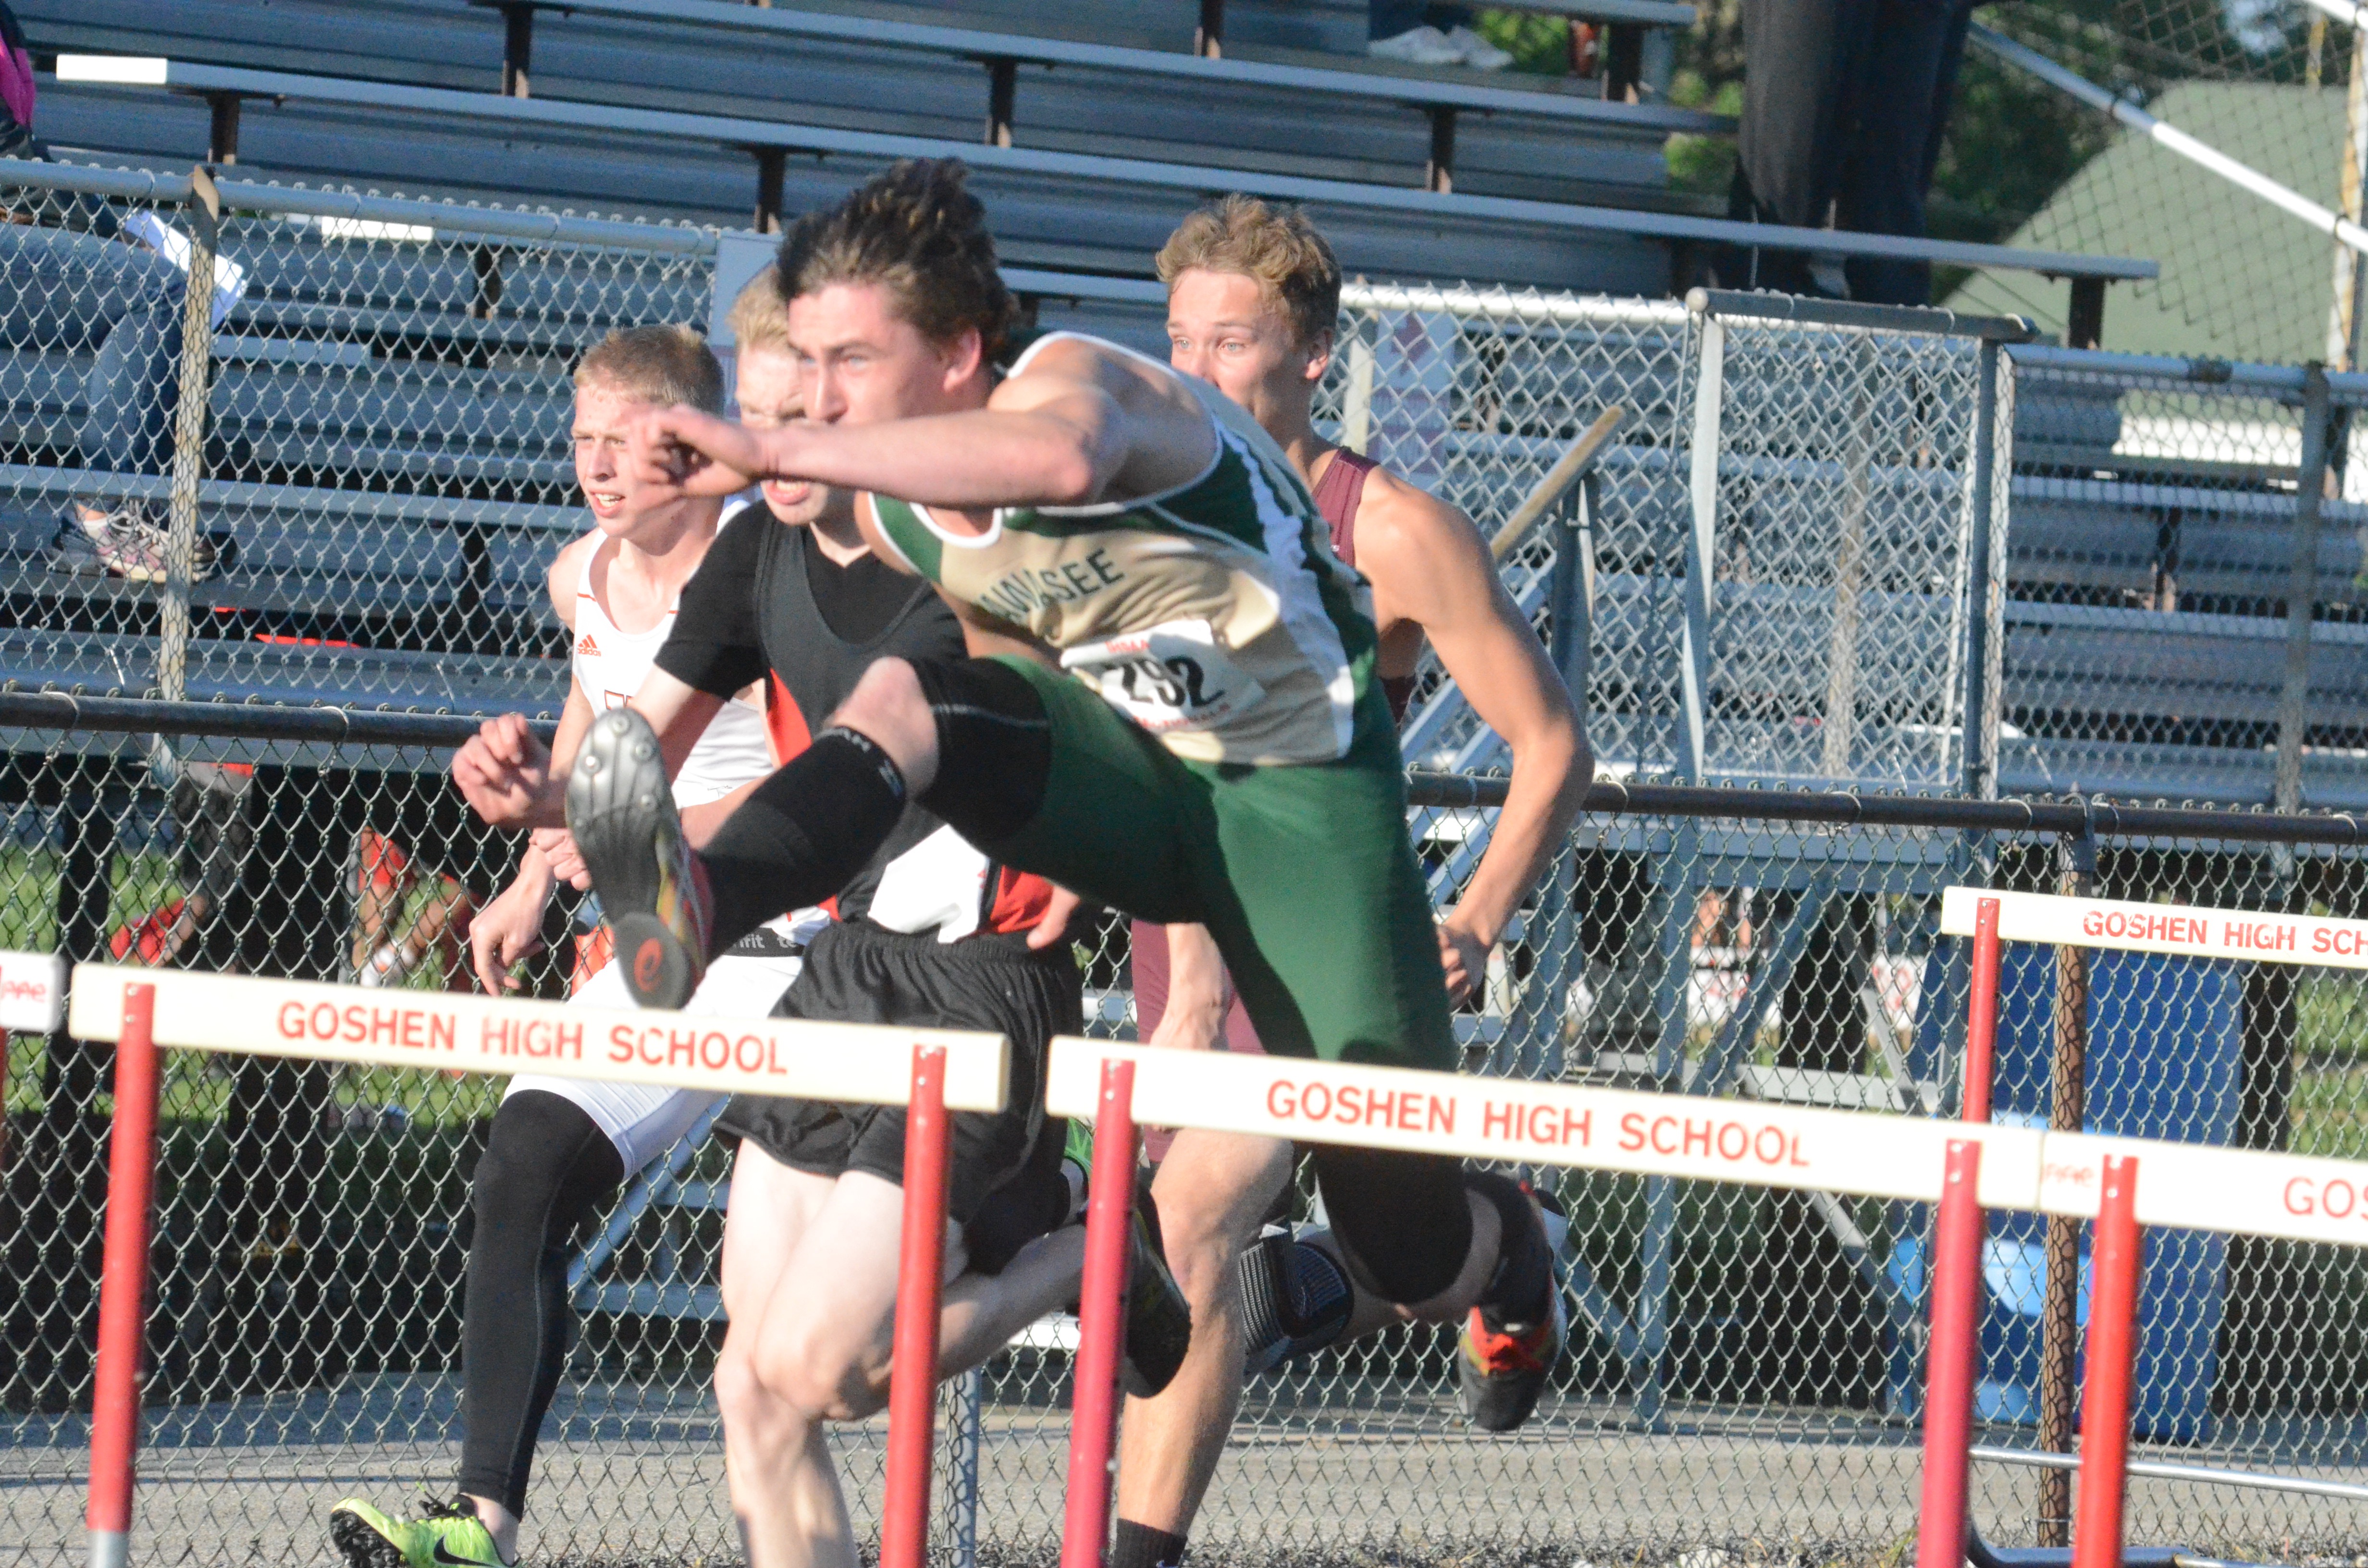 Wawasee senior Clayton Cook heads to a sectional title in the 110 hurdles Thursday night at Goshen.